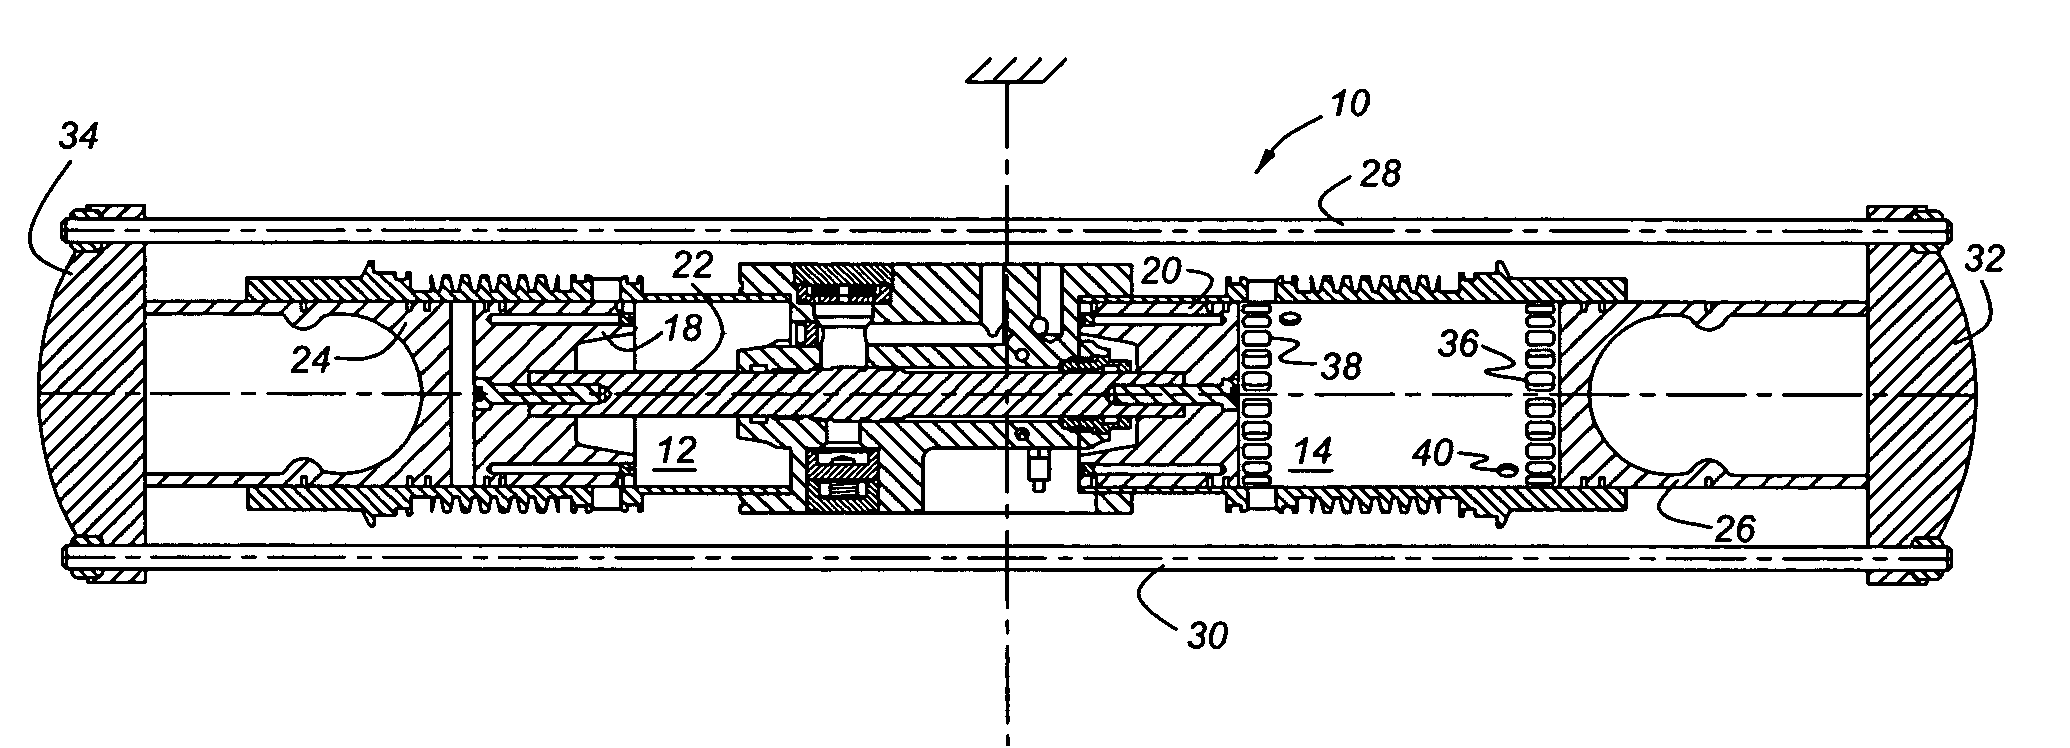 Starting a compression ignition free piston internal combustion engine having multiple cylinders